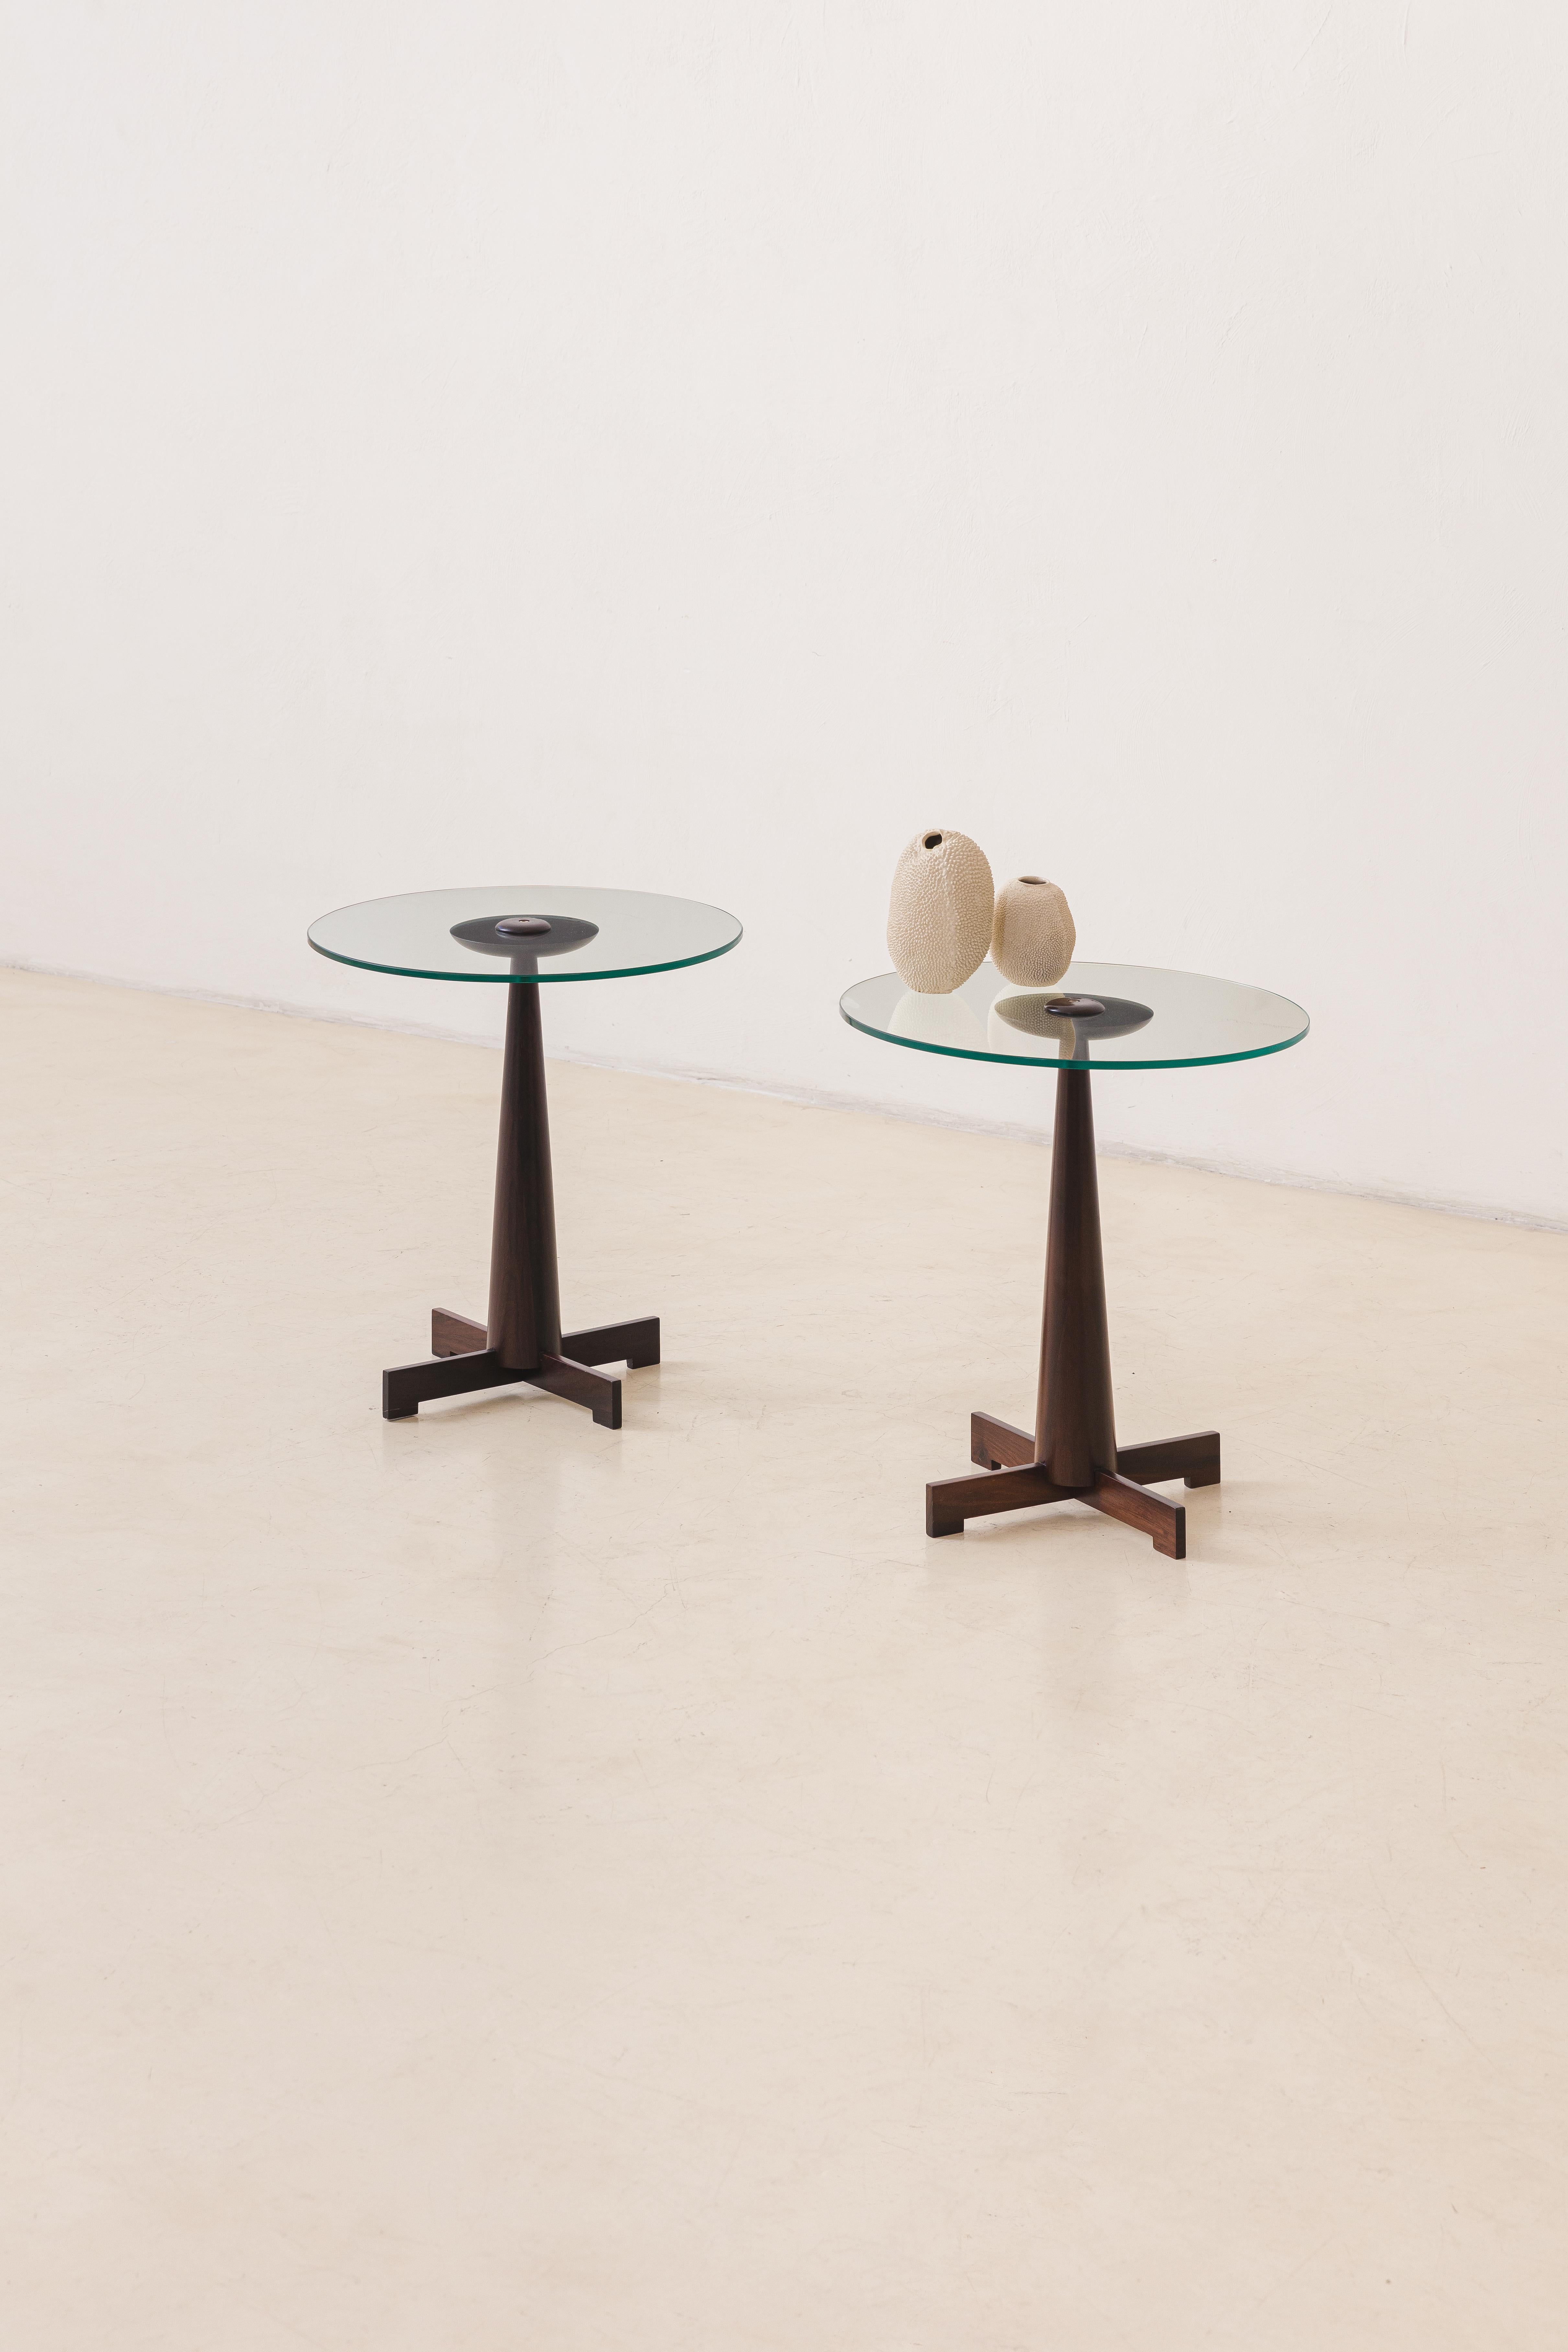 Me 508 Side Tables by Jorge Zalszupin, Rosewood and Glass, Brazil, circa 1959 For Sale 1